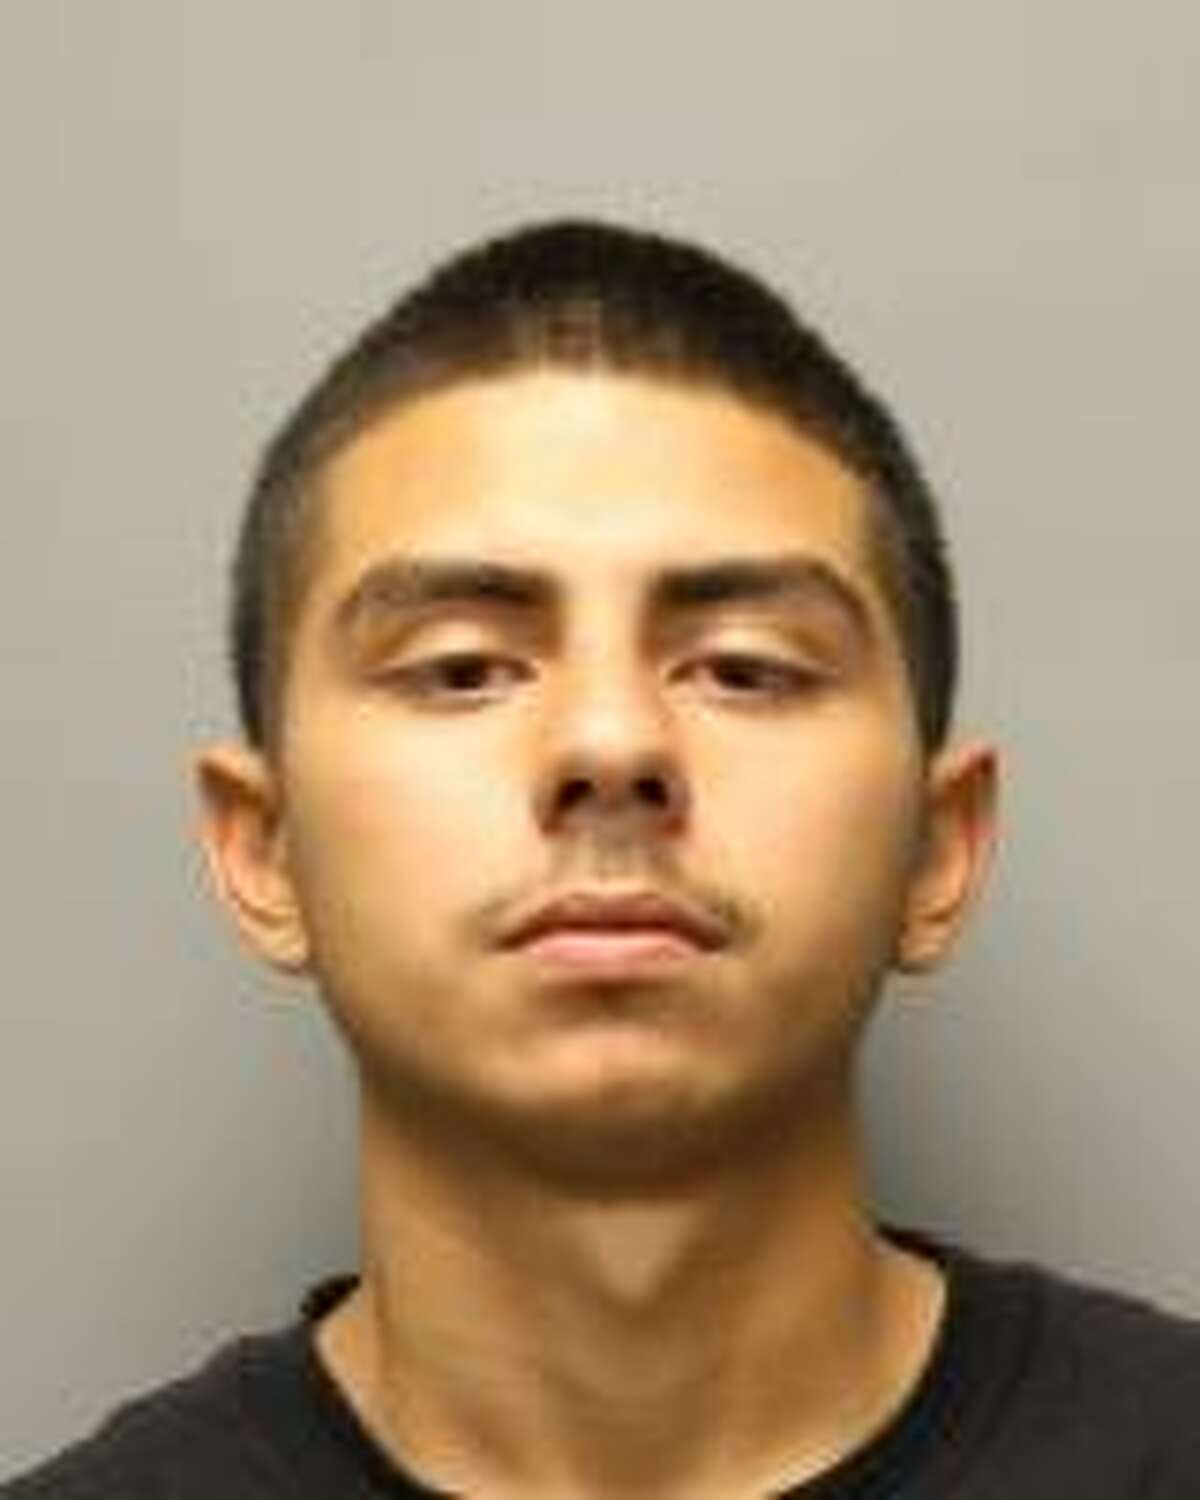 Fernando Lopez, 23, was charged with intoxication manslaughter and intoxication assault after allegedly causing a deadly wrong-way crash on Interstate 45 early Thursday, Dec. 19, 2019, while intoxicated.